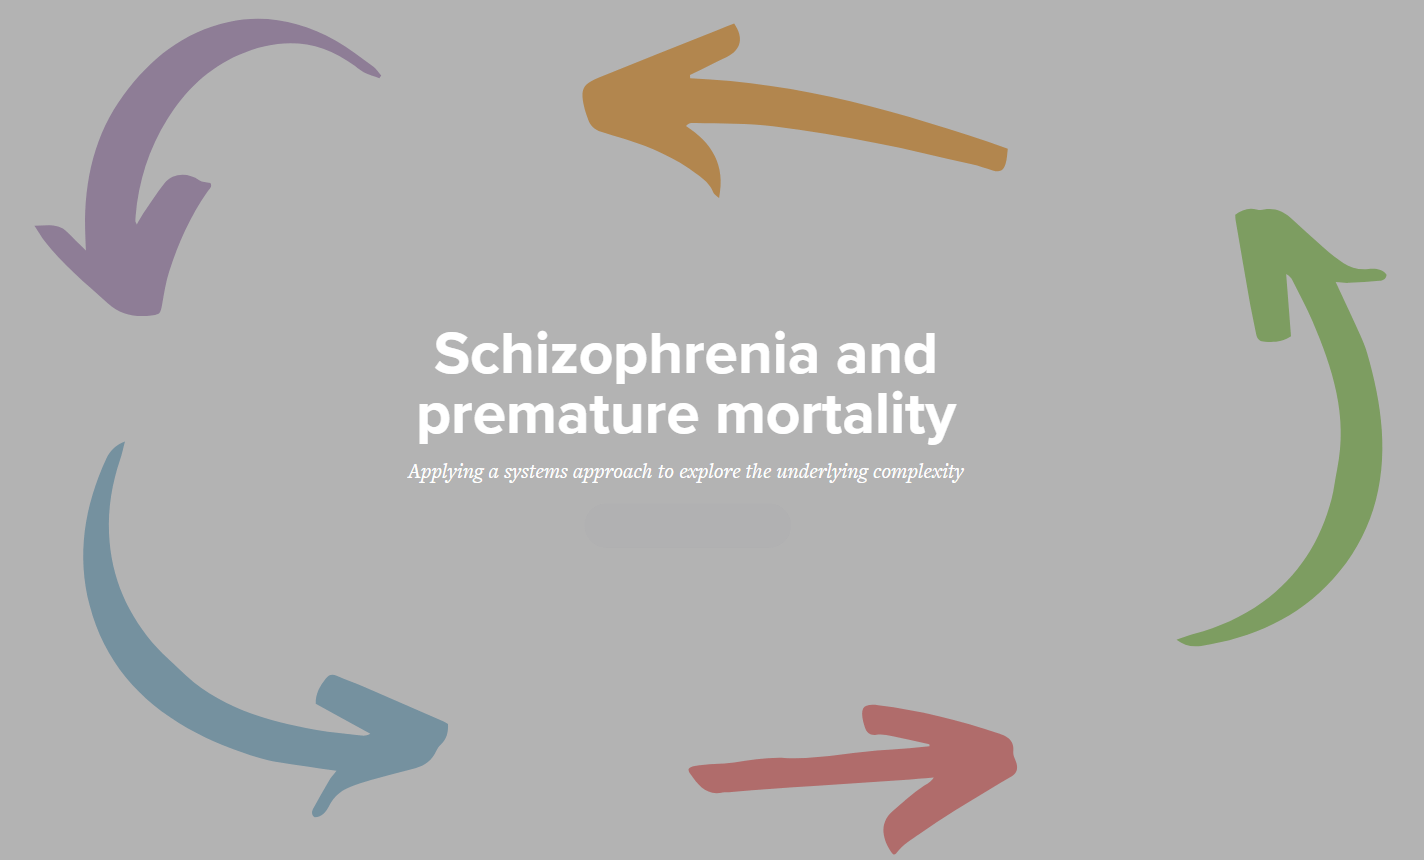 Social factors critical to early mortality for people with schizophrenia